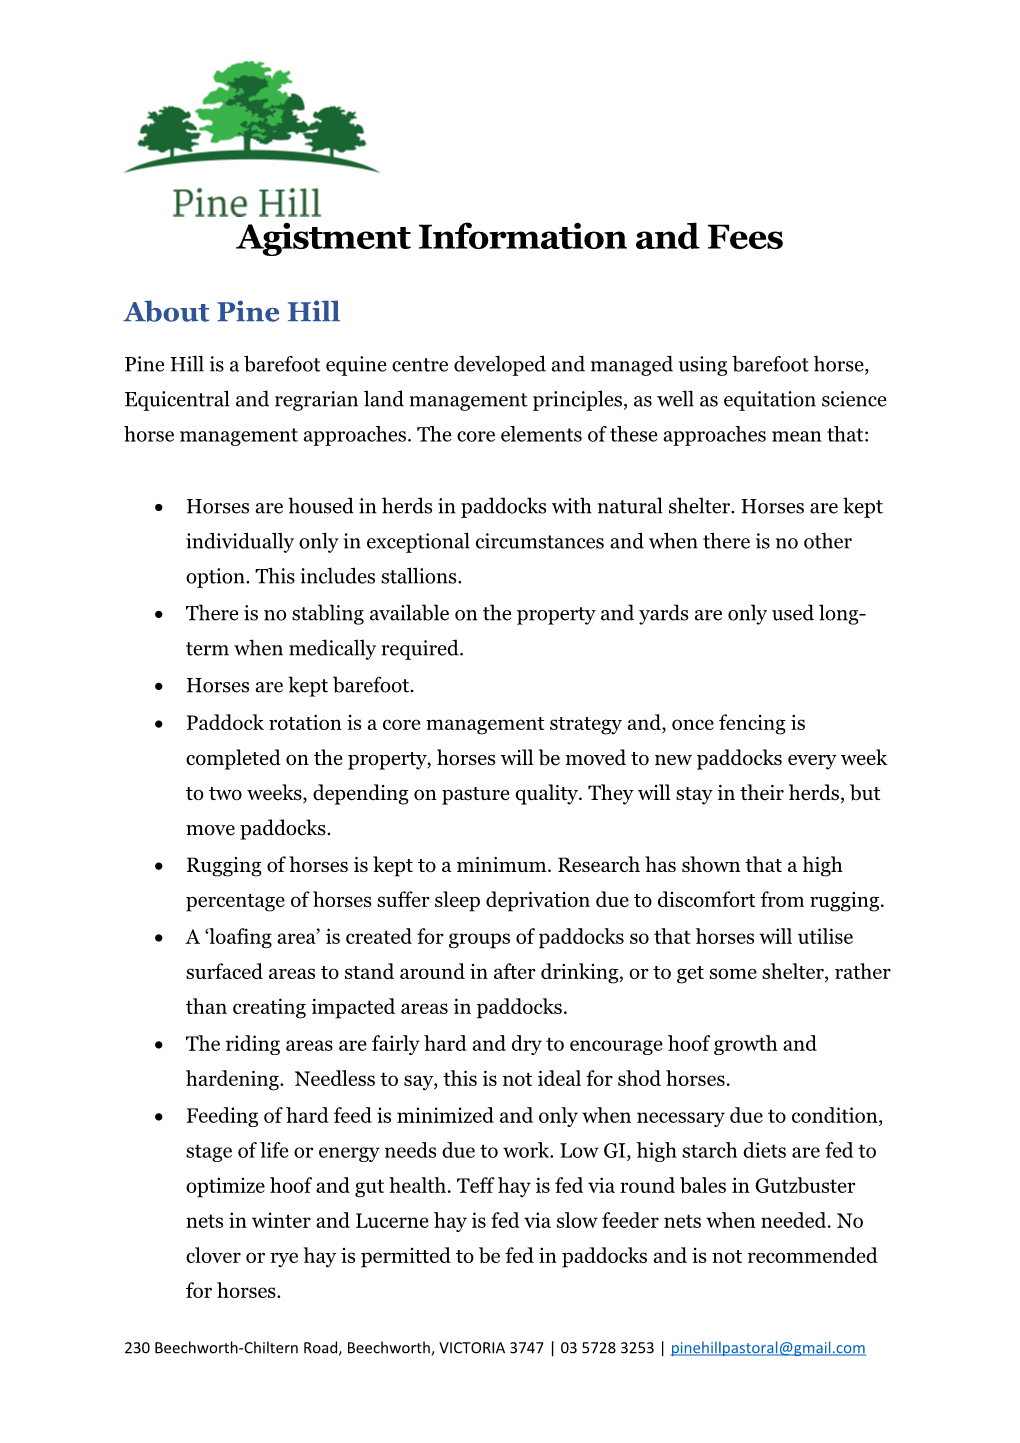 Agistment Information and Fees